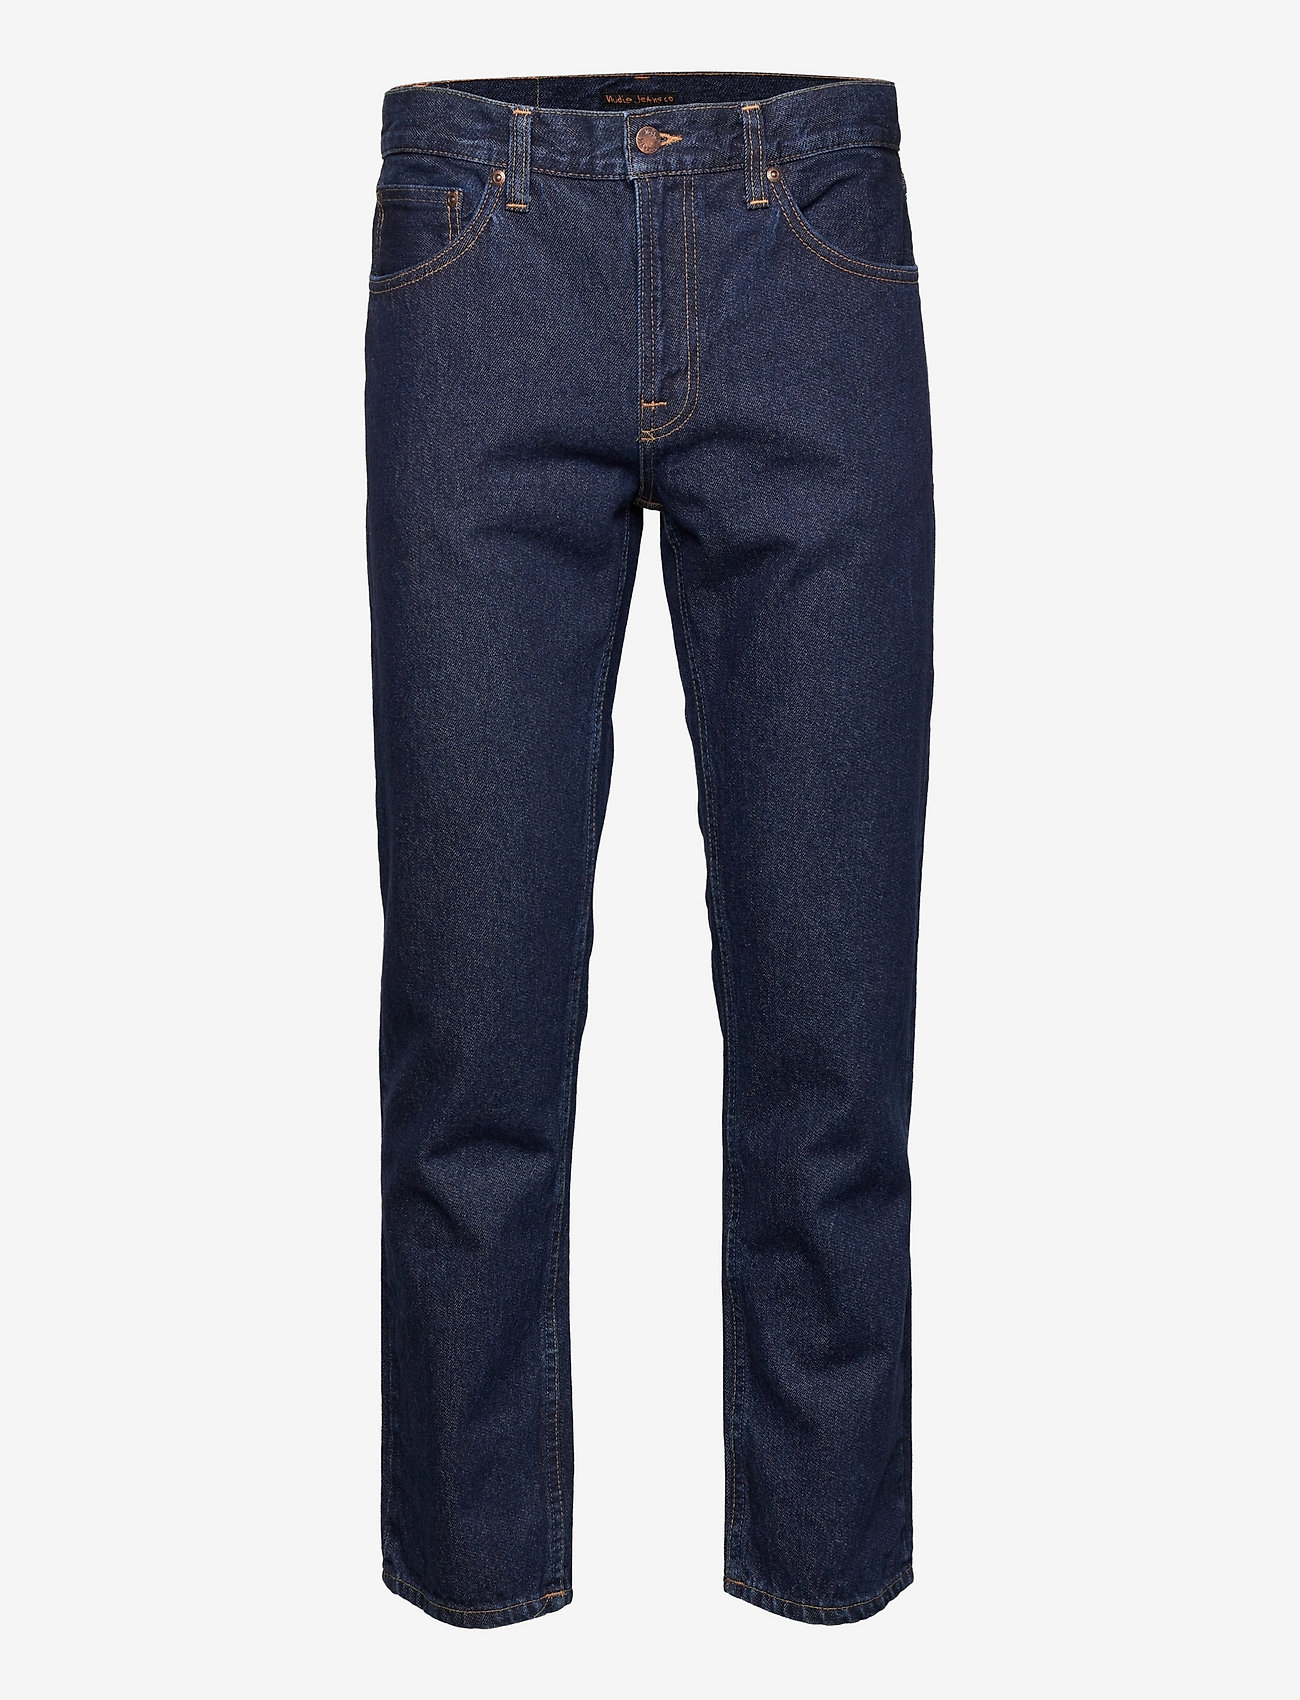 Nudie Jeans - Gritty Jackson - regular jeans - heavy rinse - 1